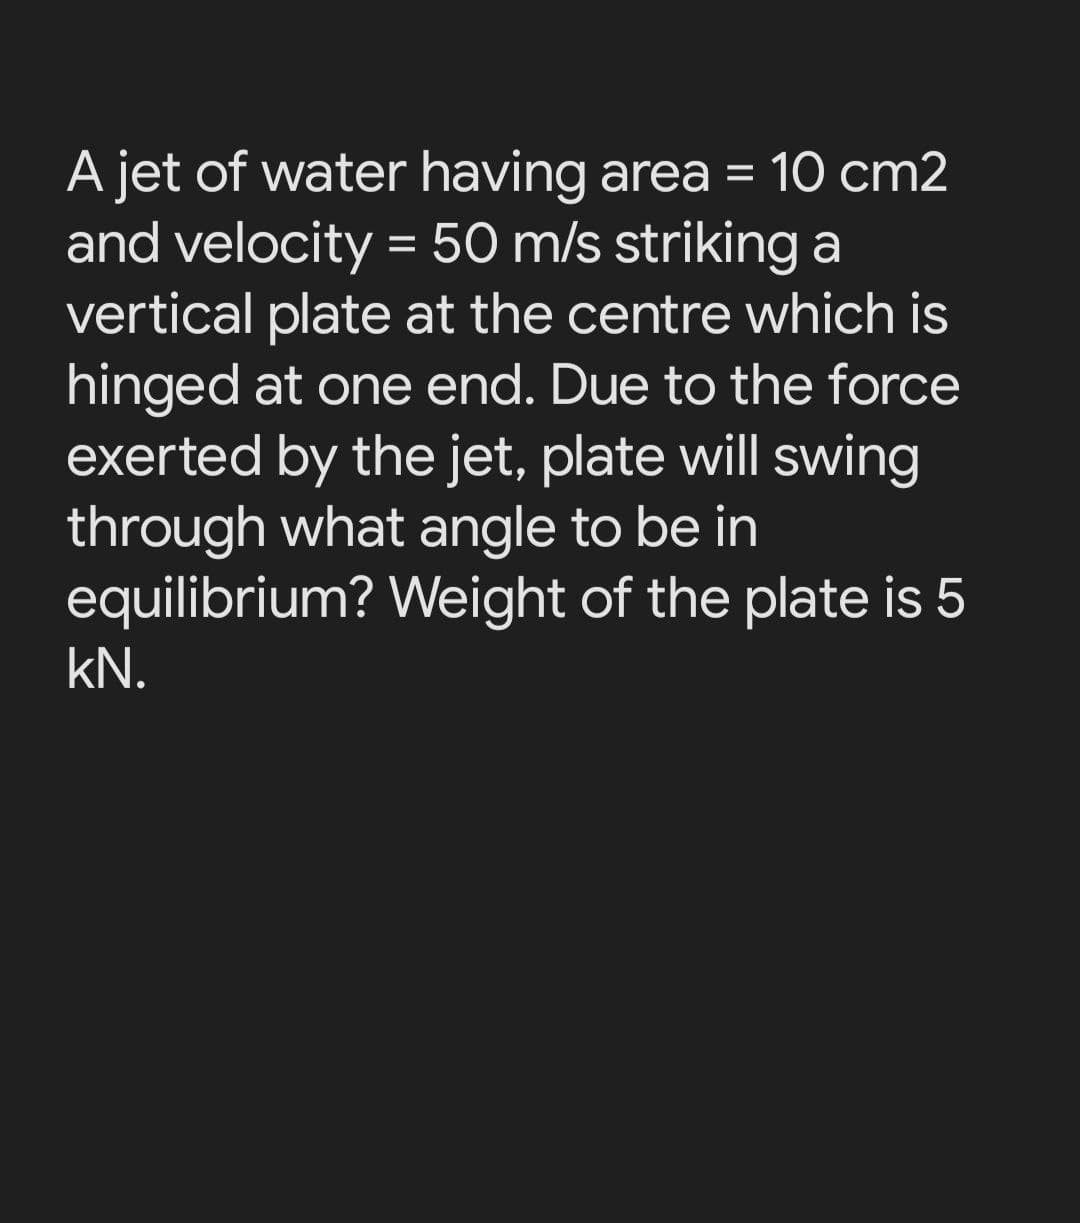 A jet of water having area = 10 cm2
and velocity = 50 m/s striking a
vertical plate at the centre which is
hinged at one end. Due to the force
exerted by the jet, plate will swing
through what angle to be in
equilibrium? Weight of the plate is 5
%3D
kN.
